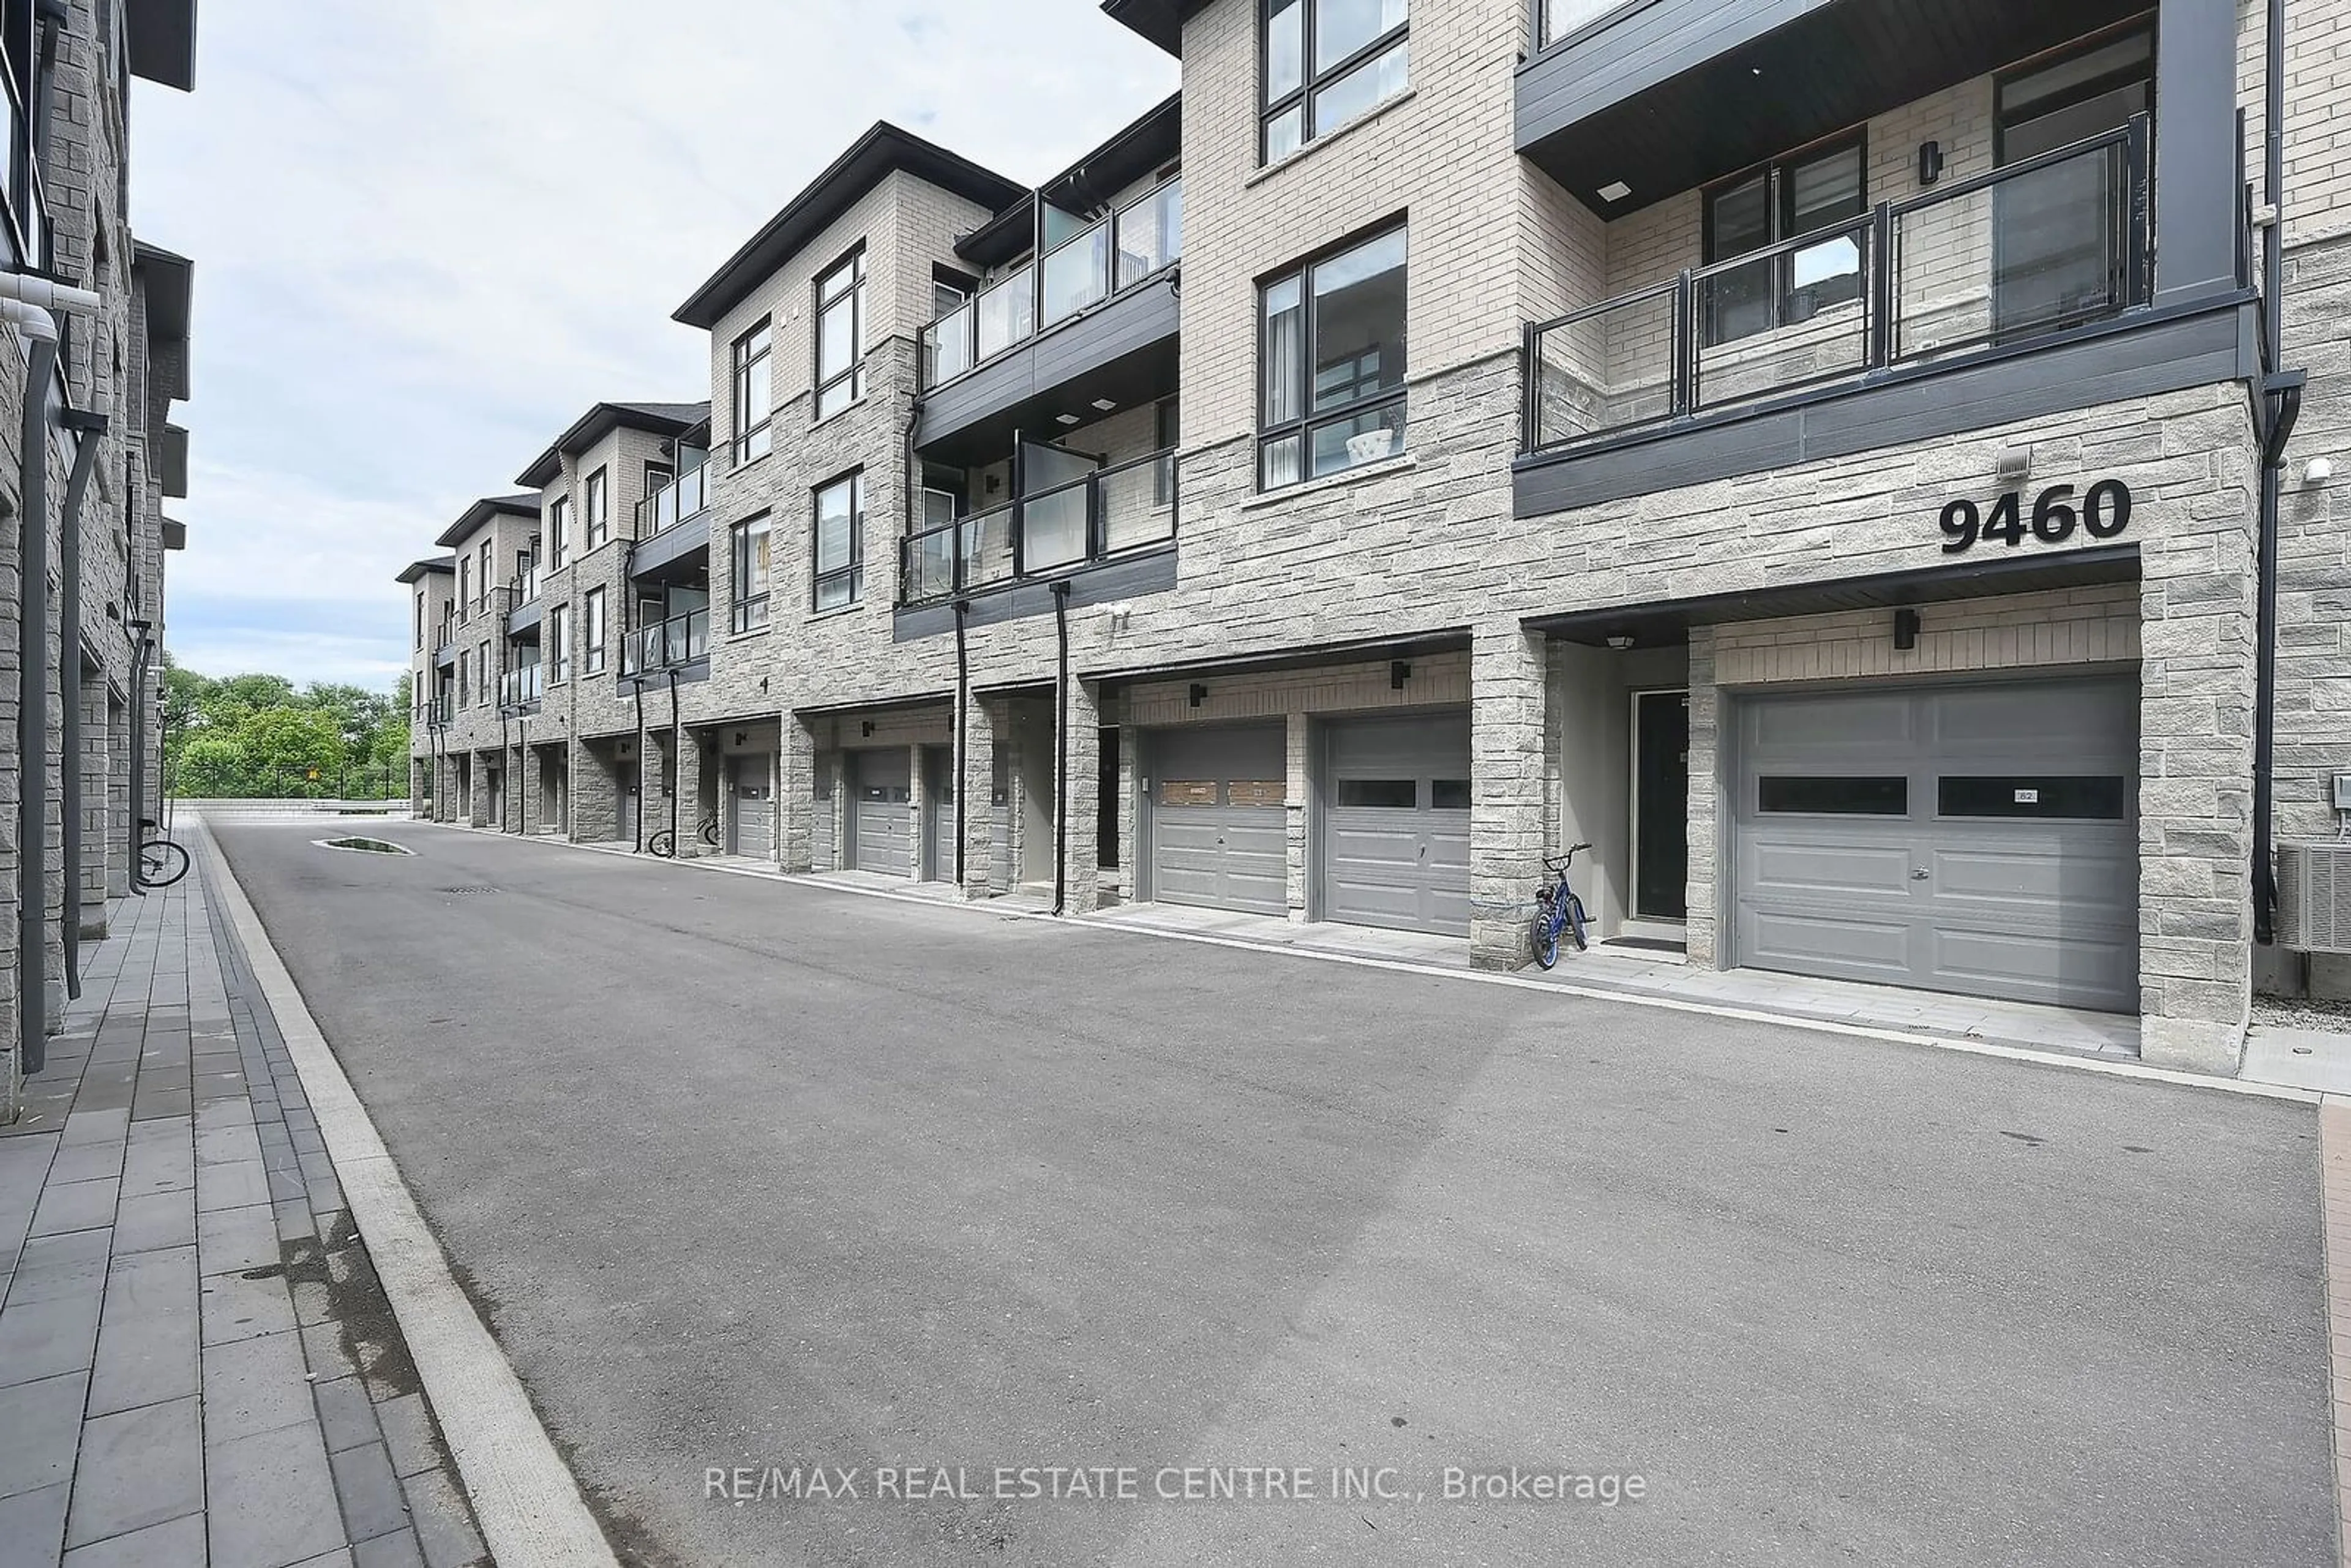 A pic from exterior of the house or condo for 9460 The Gore Rd #84, Brampton Ontario L6P 4P9